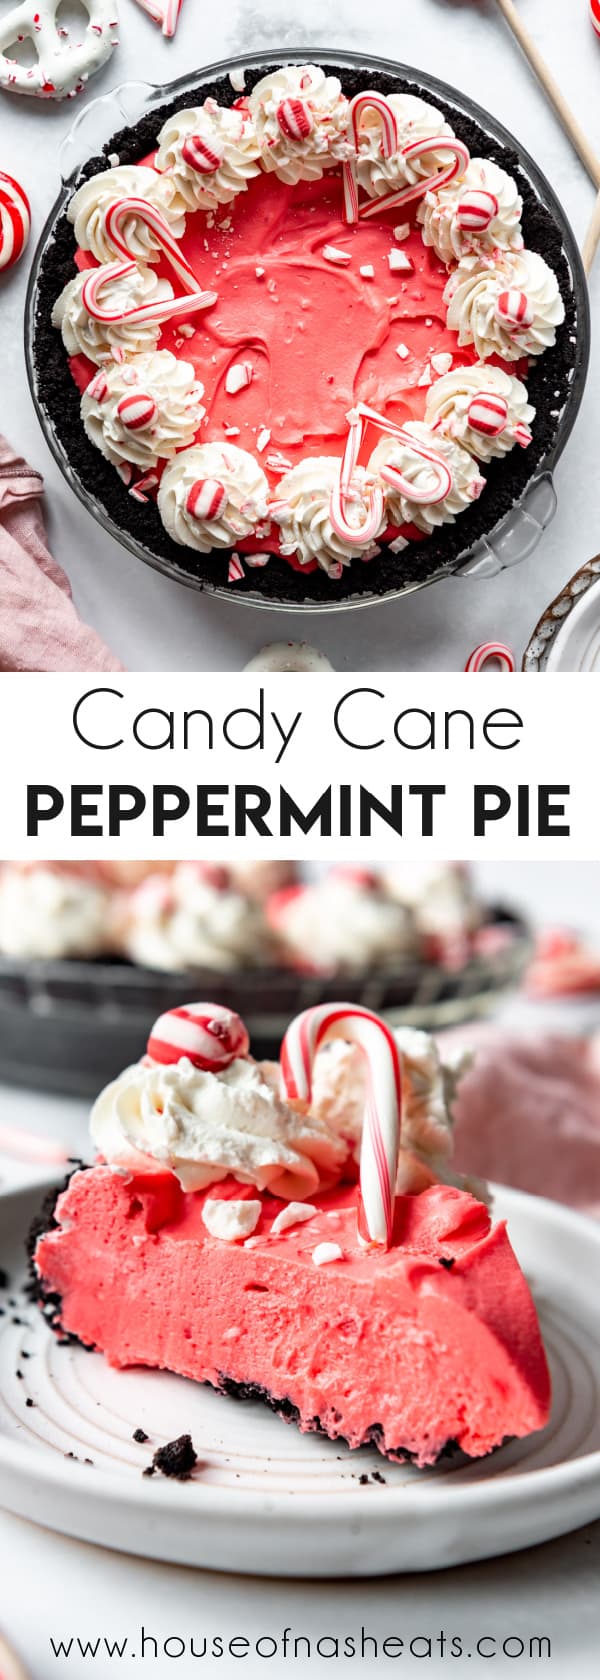 A collage of images of a peppermint pie with text overlay.